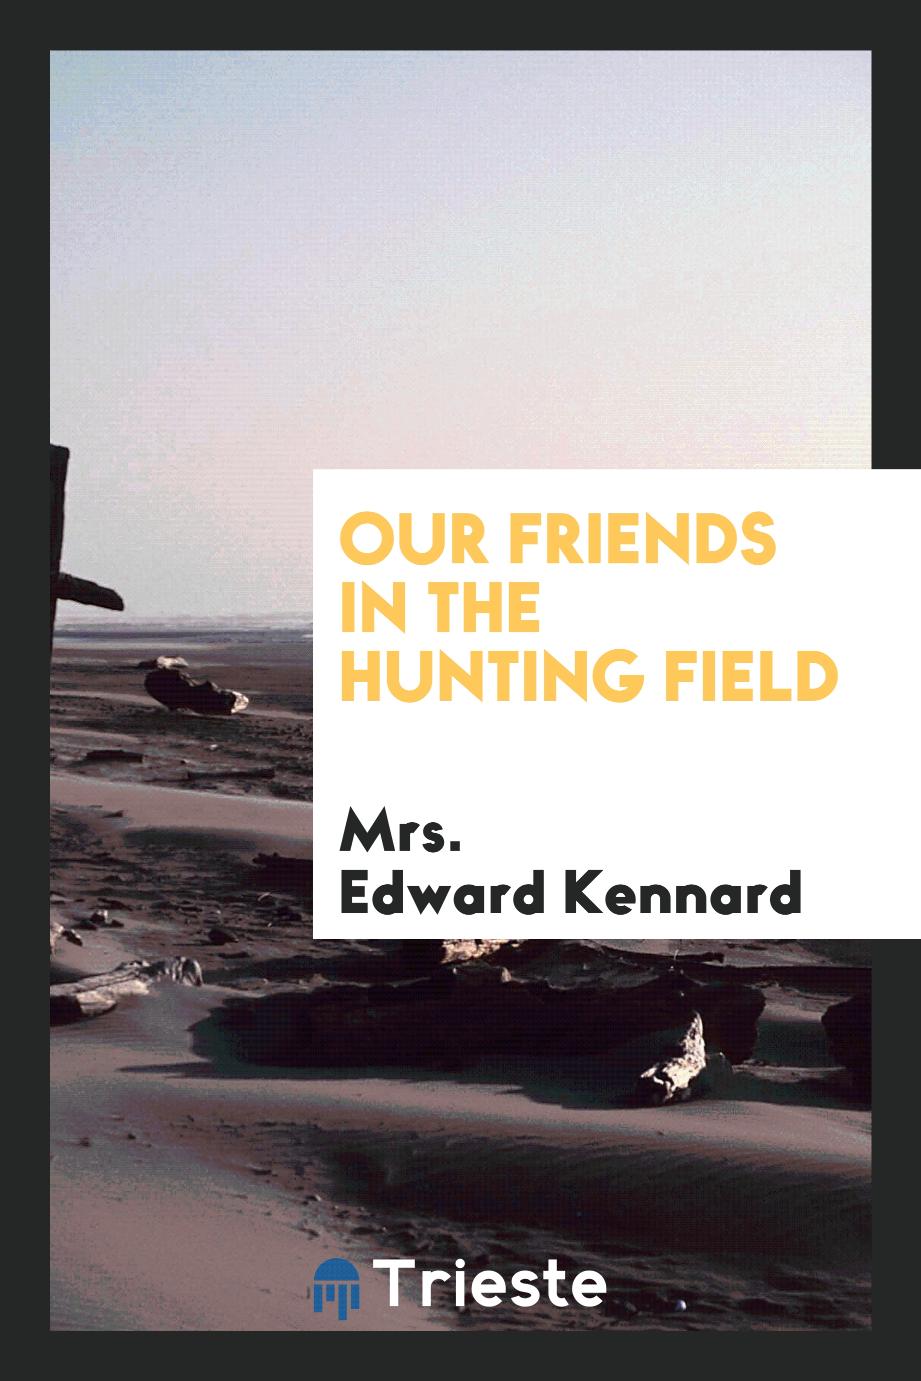 Mrs. Edward Kennard - Our friends in the hunting field